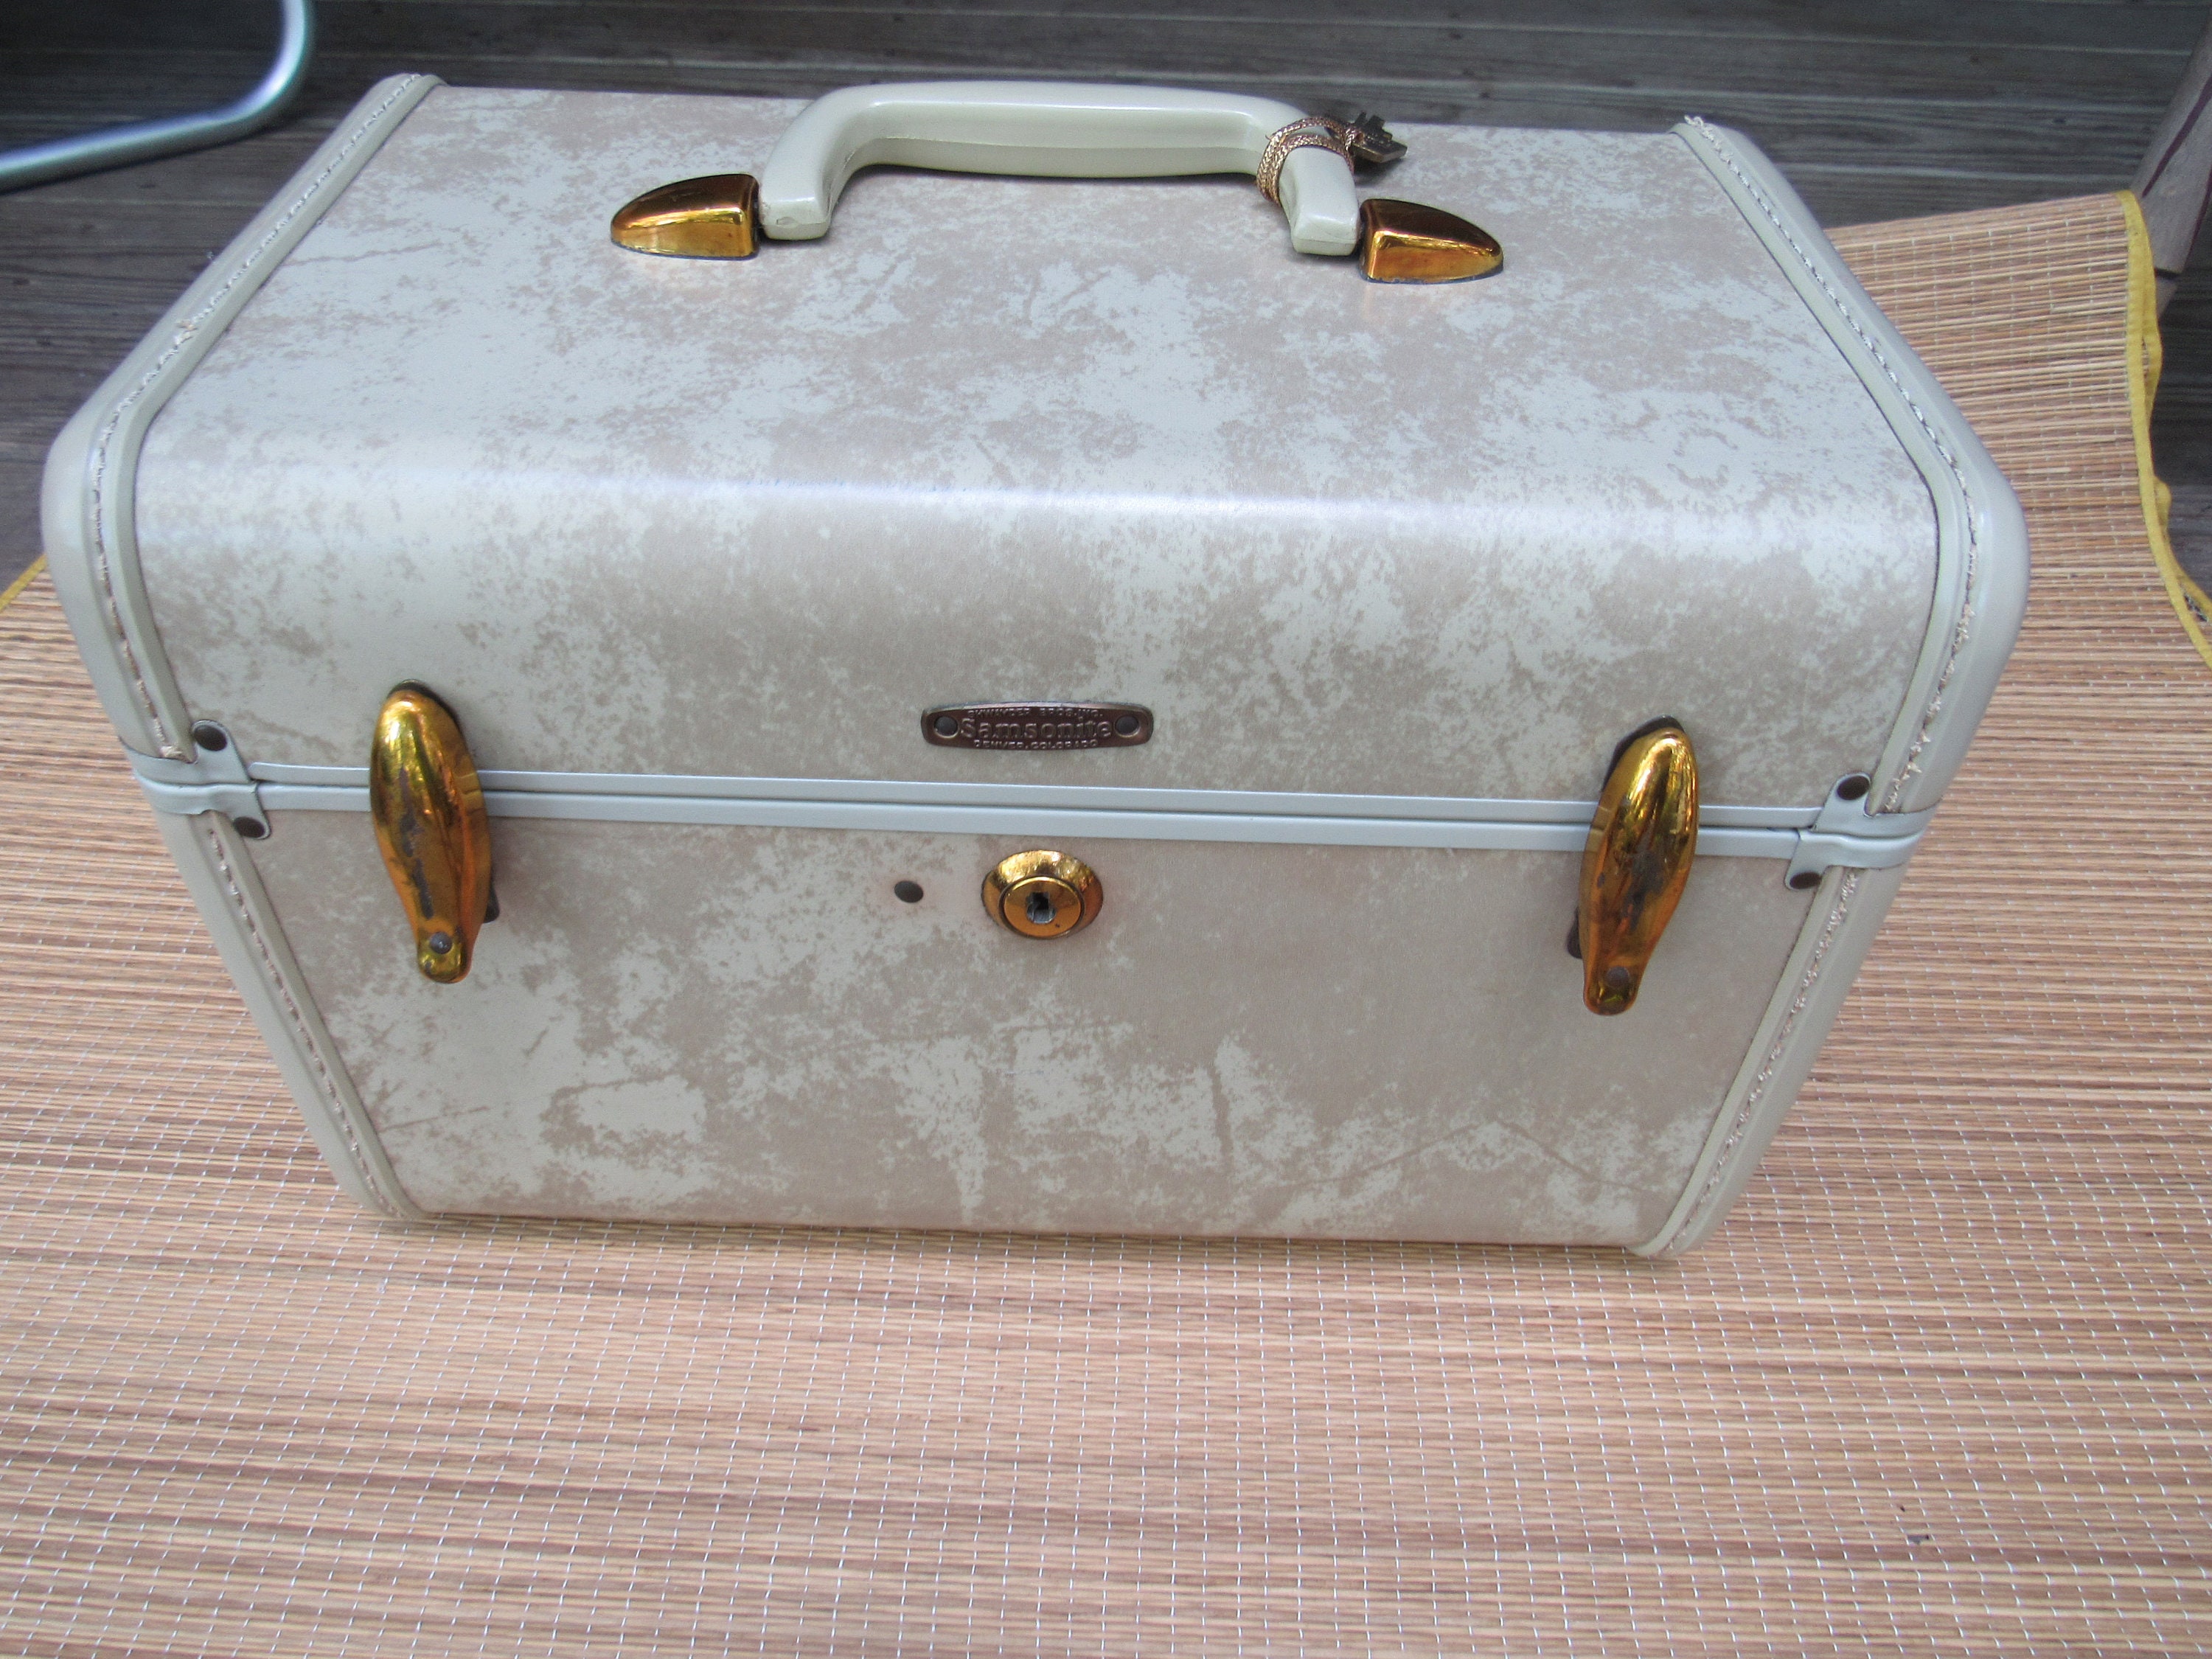 Source Vintage Locking Train Case for Cosmetics Storage Hat Carry